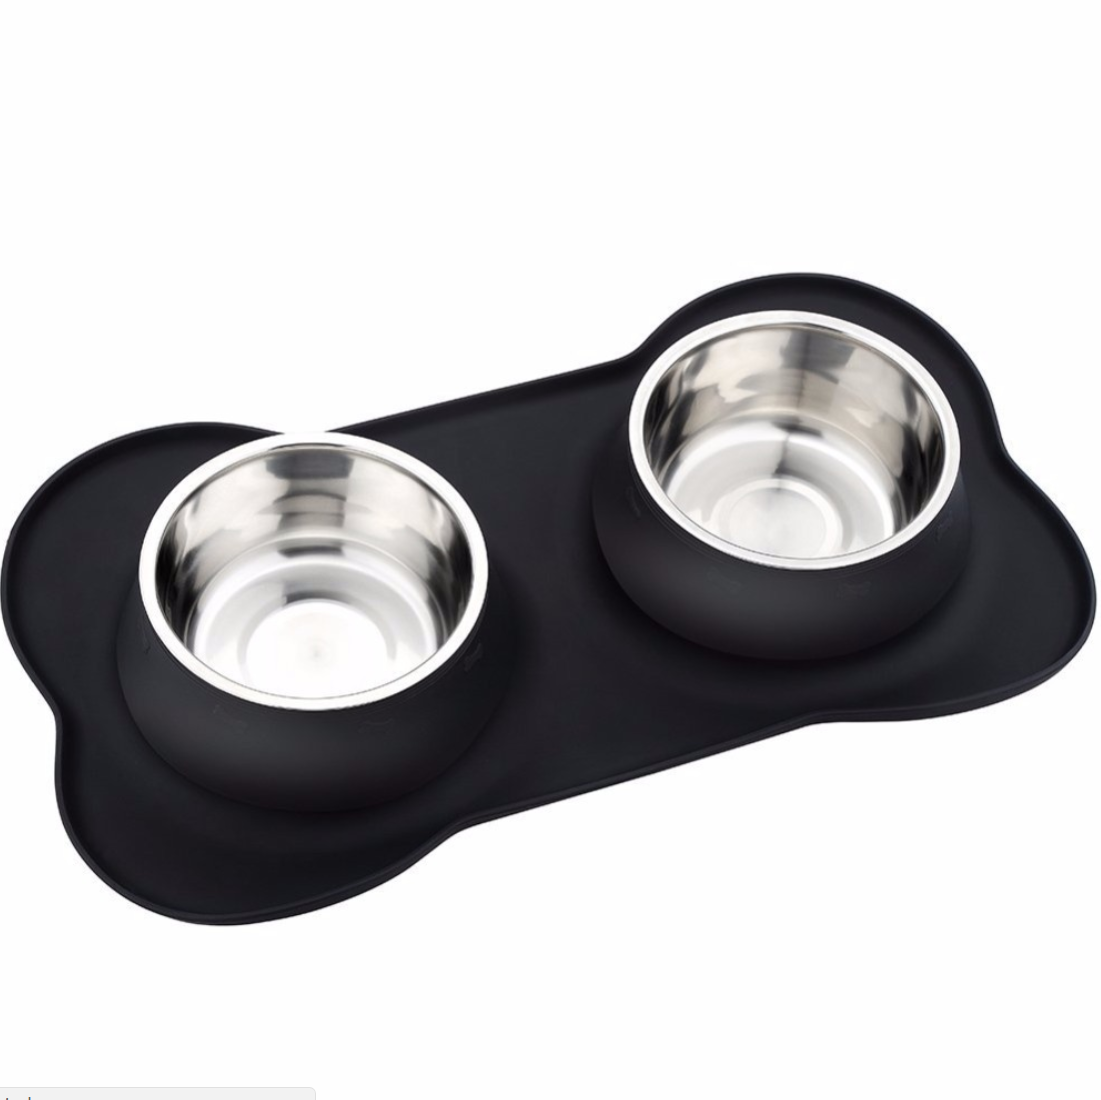 Silicone Foldable Pet Double Stainless Bowl Pet Feeder